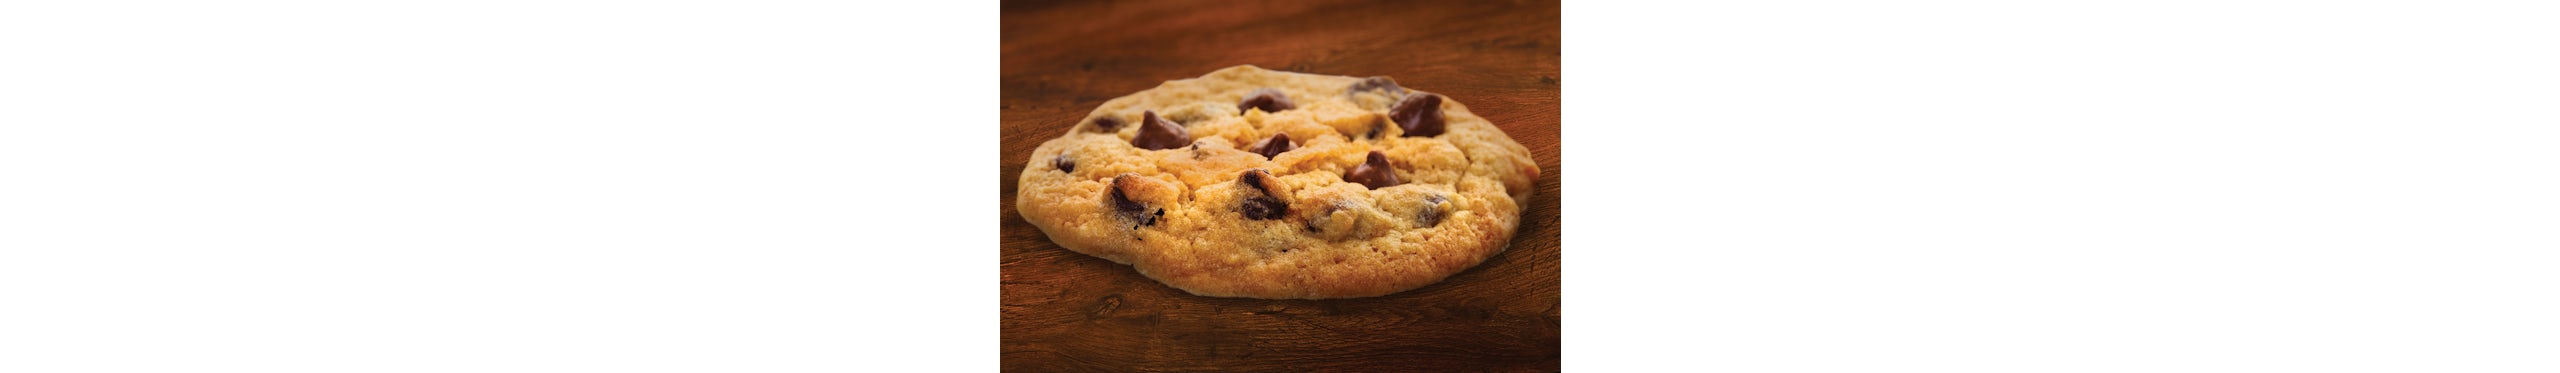 Fresh-Baked Chocolate Chip Cookie